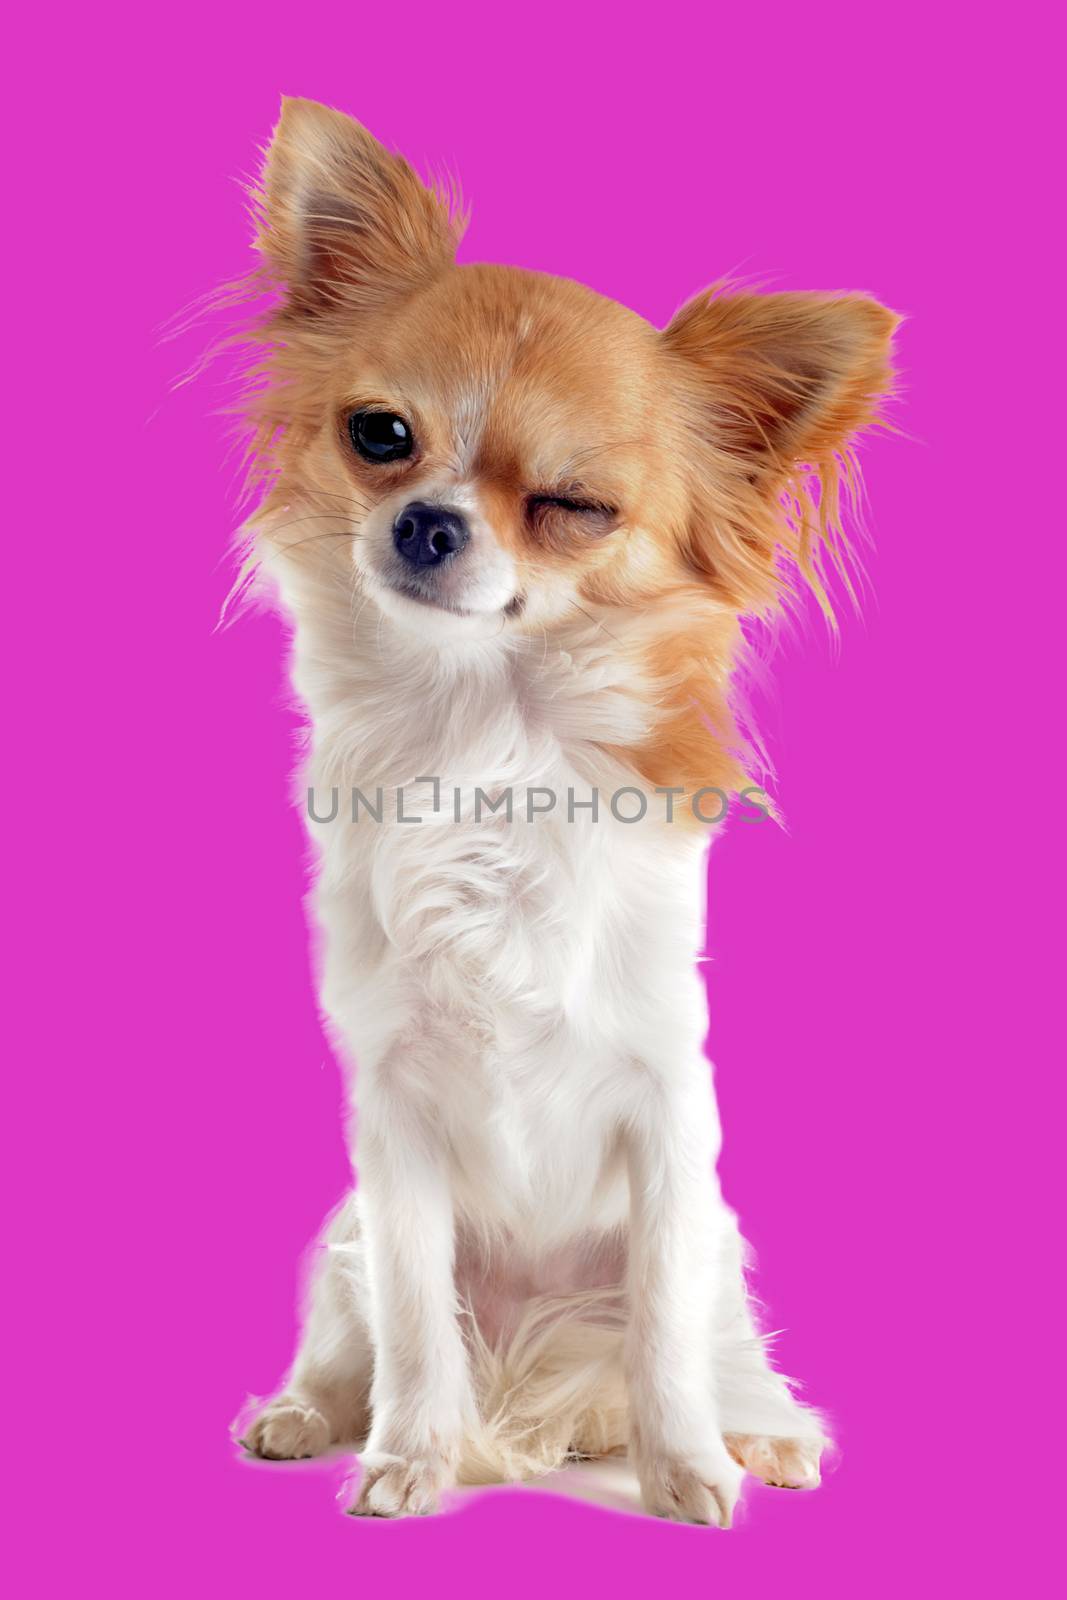 wink of chihuahua in front of white background